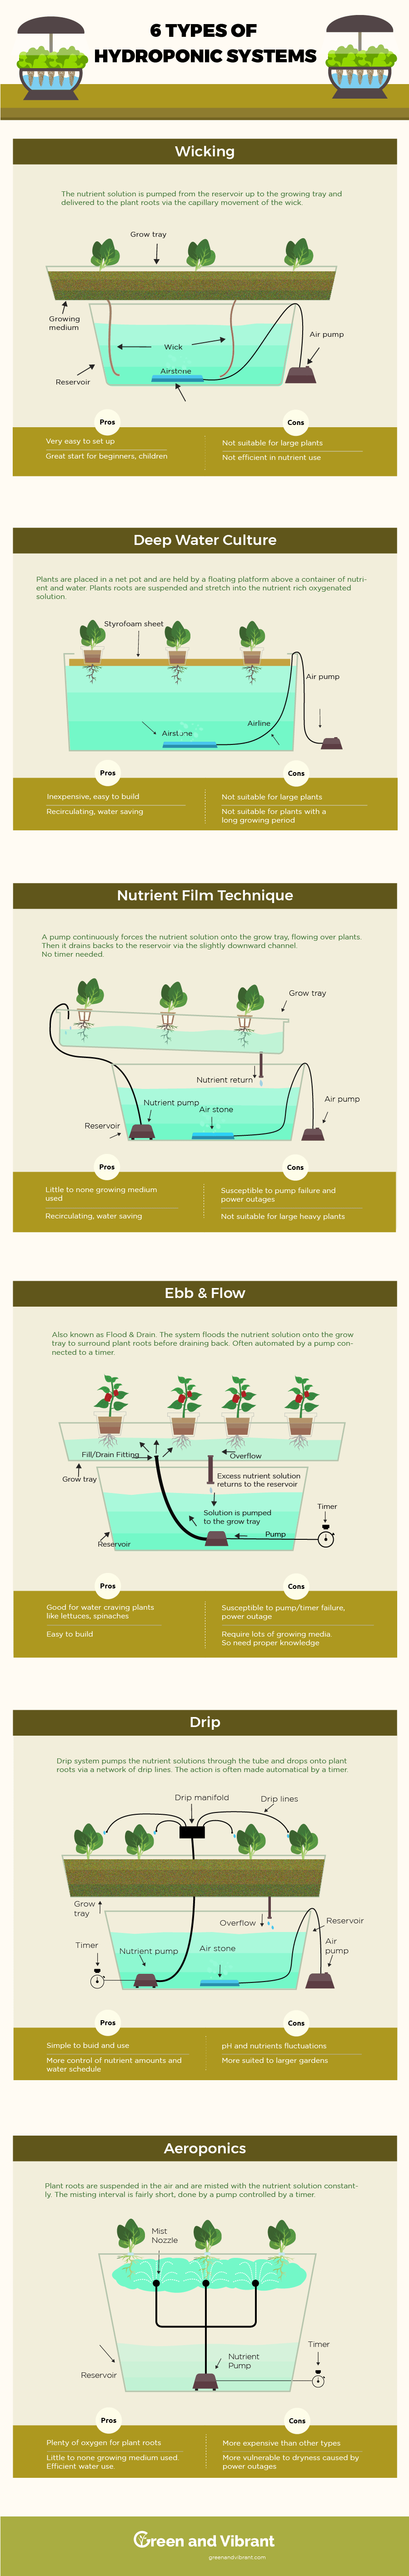 Hydroponic System Infographic